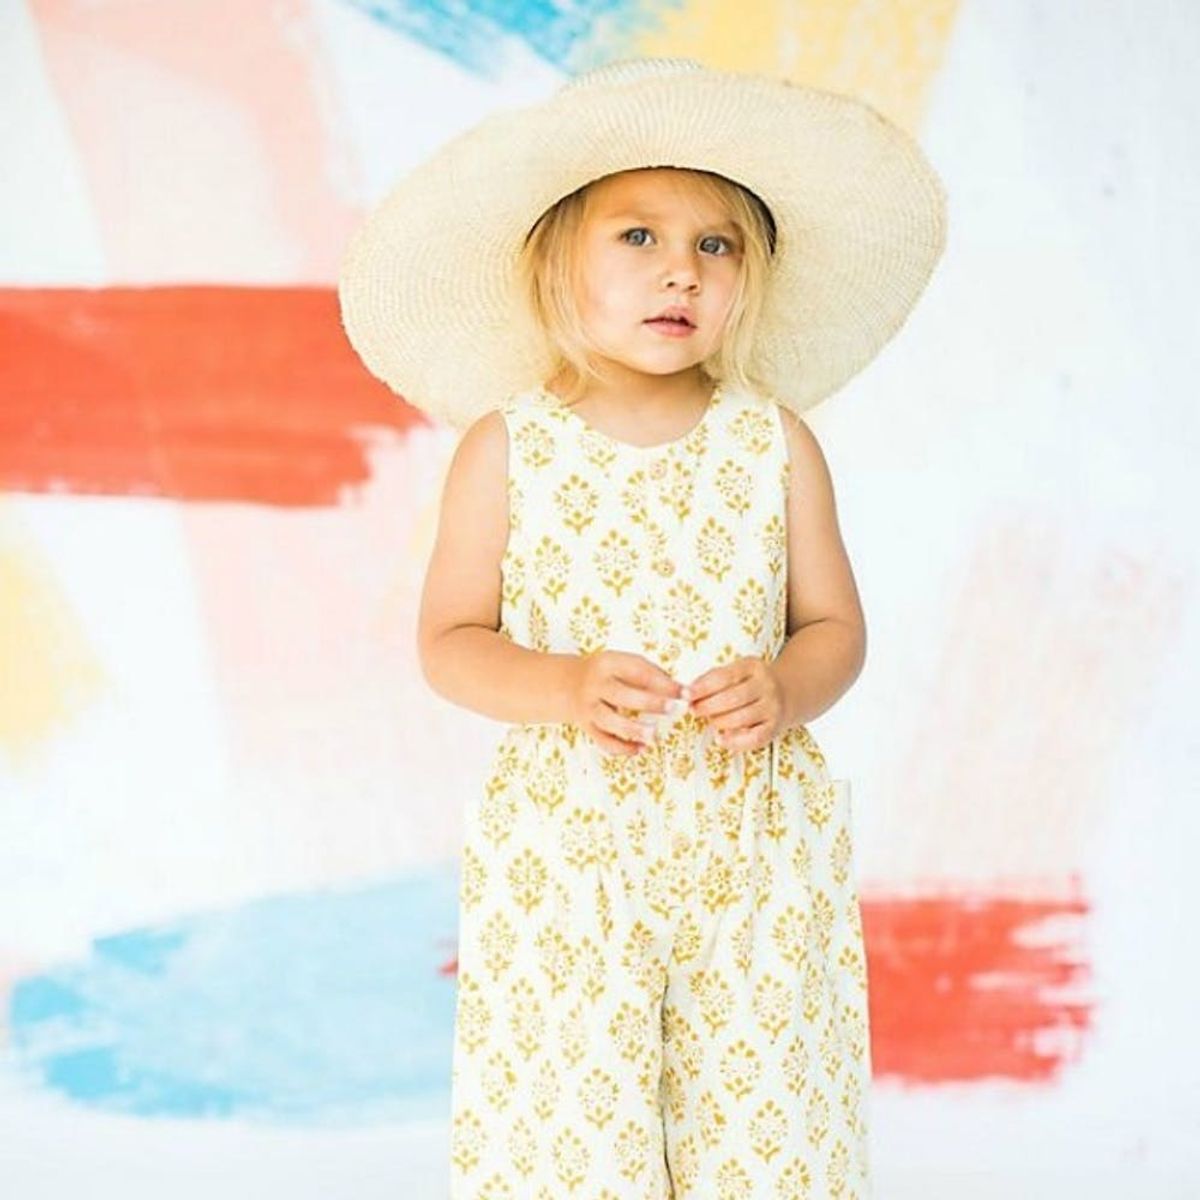 11 Adorable Back-to-School Outfits for Stylish Kids